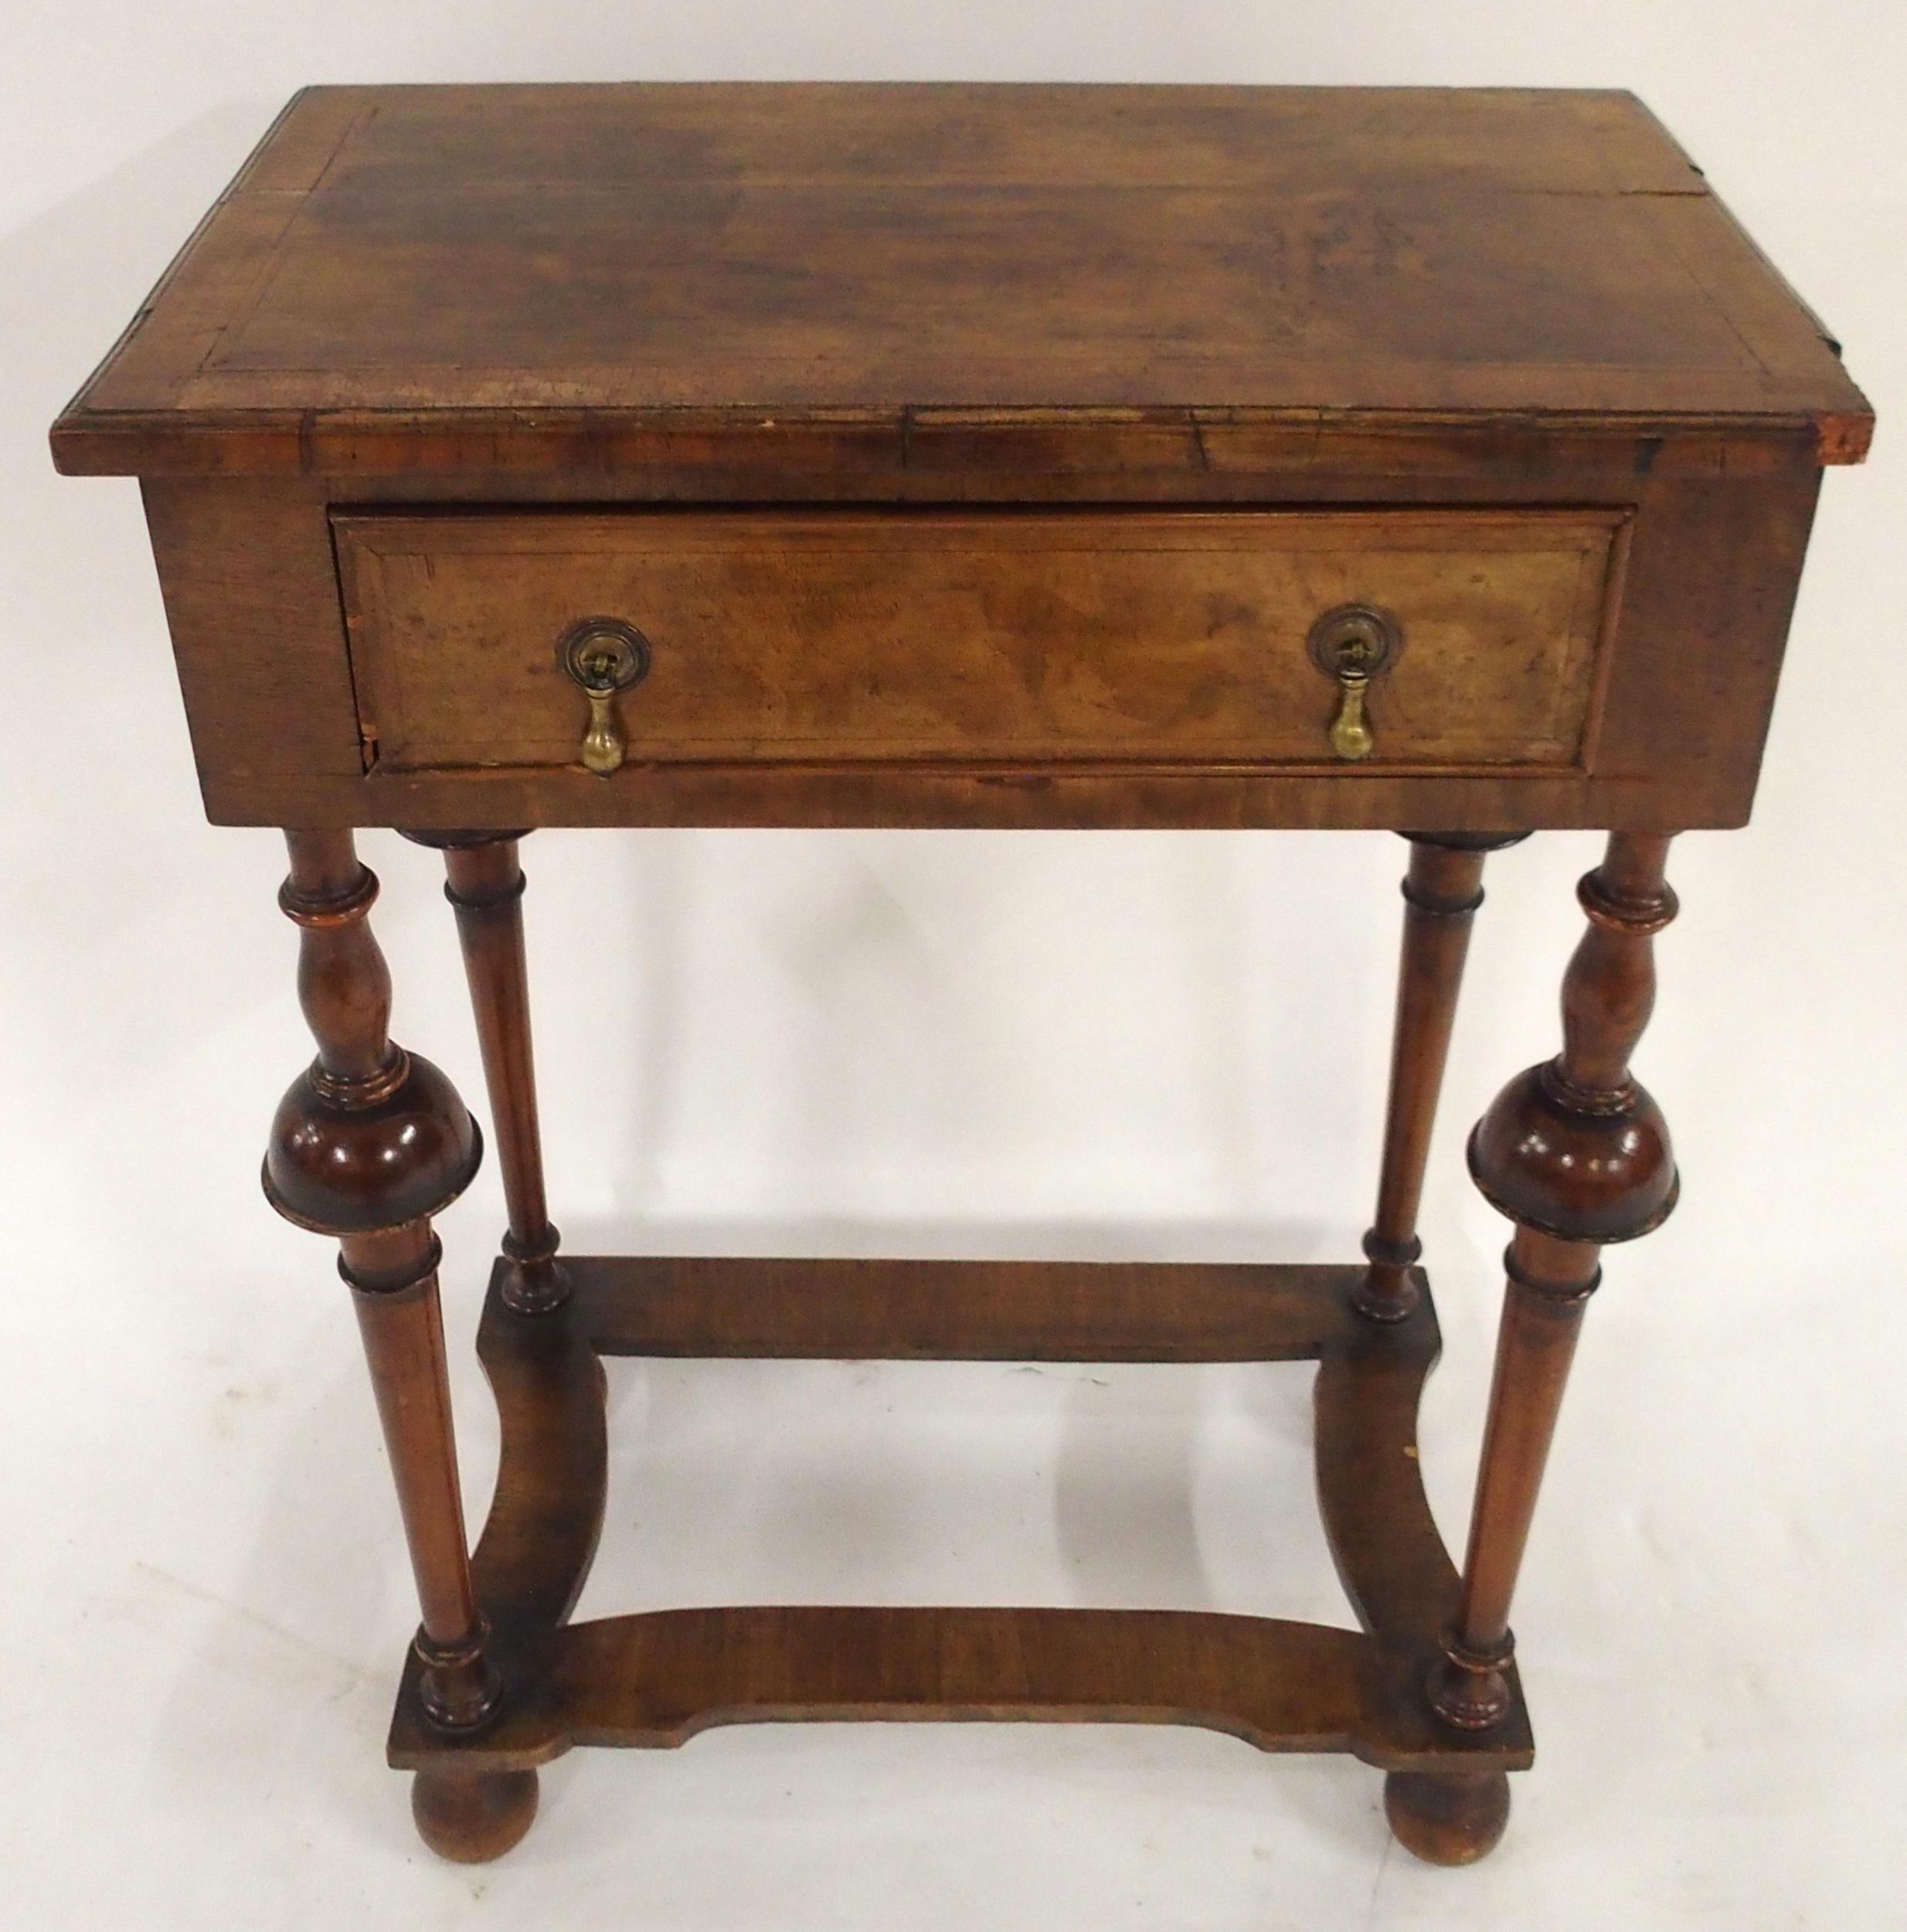 A GEORGIAN WALNUT SINGLE DRAWER OCCASIONAL TABLE on turned stretchered supports, 70cm high x 51cm